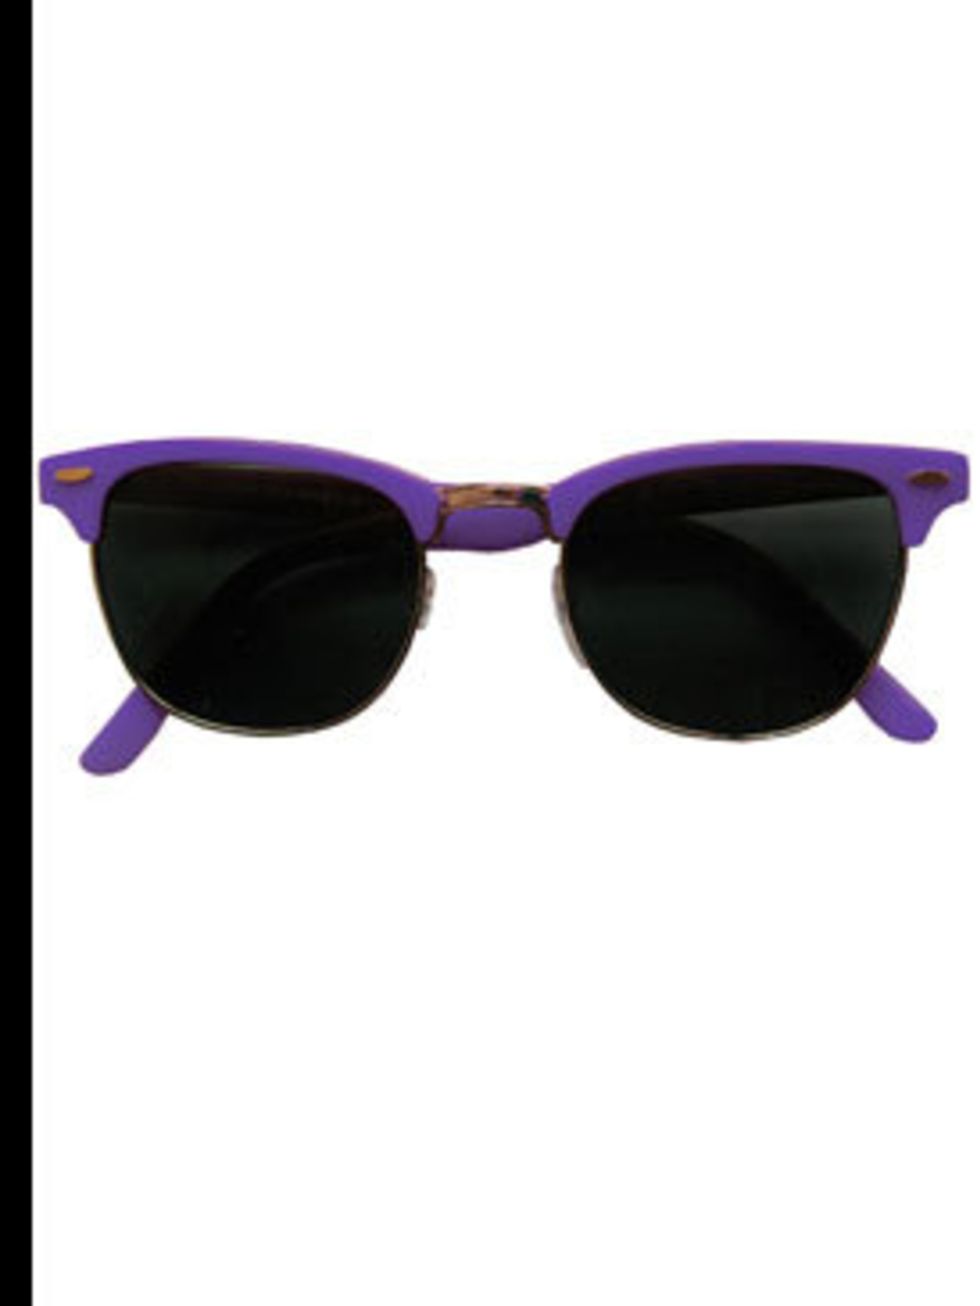 <p>Purple sunglasses, £14, by <a href="http://www.lazyoaf.co.uk/product_info.php?cPath=72_83&amp;products_id=1289">Lazy Oaf</a></p>